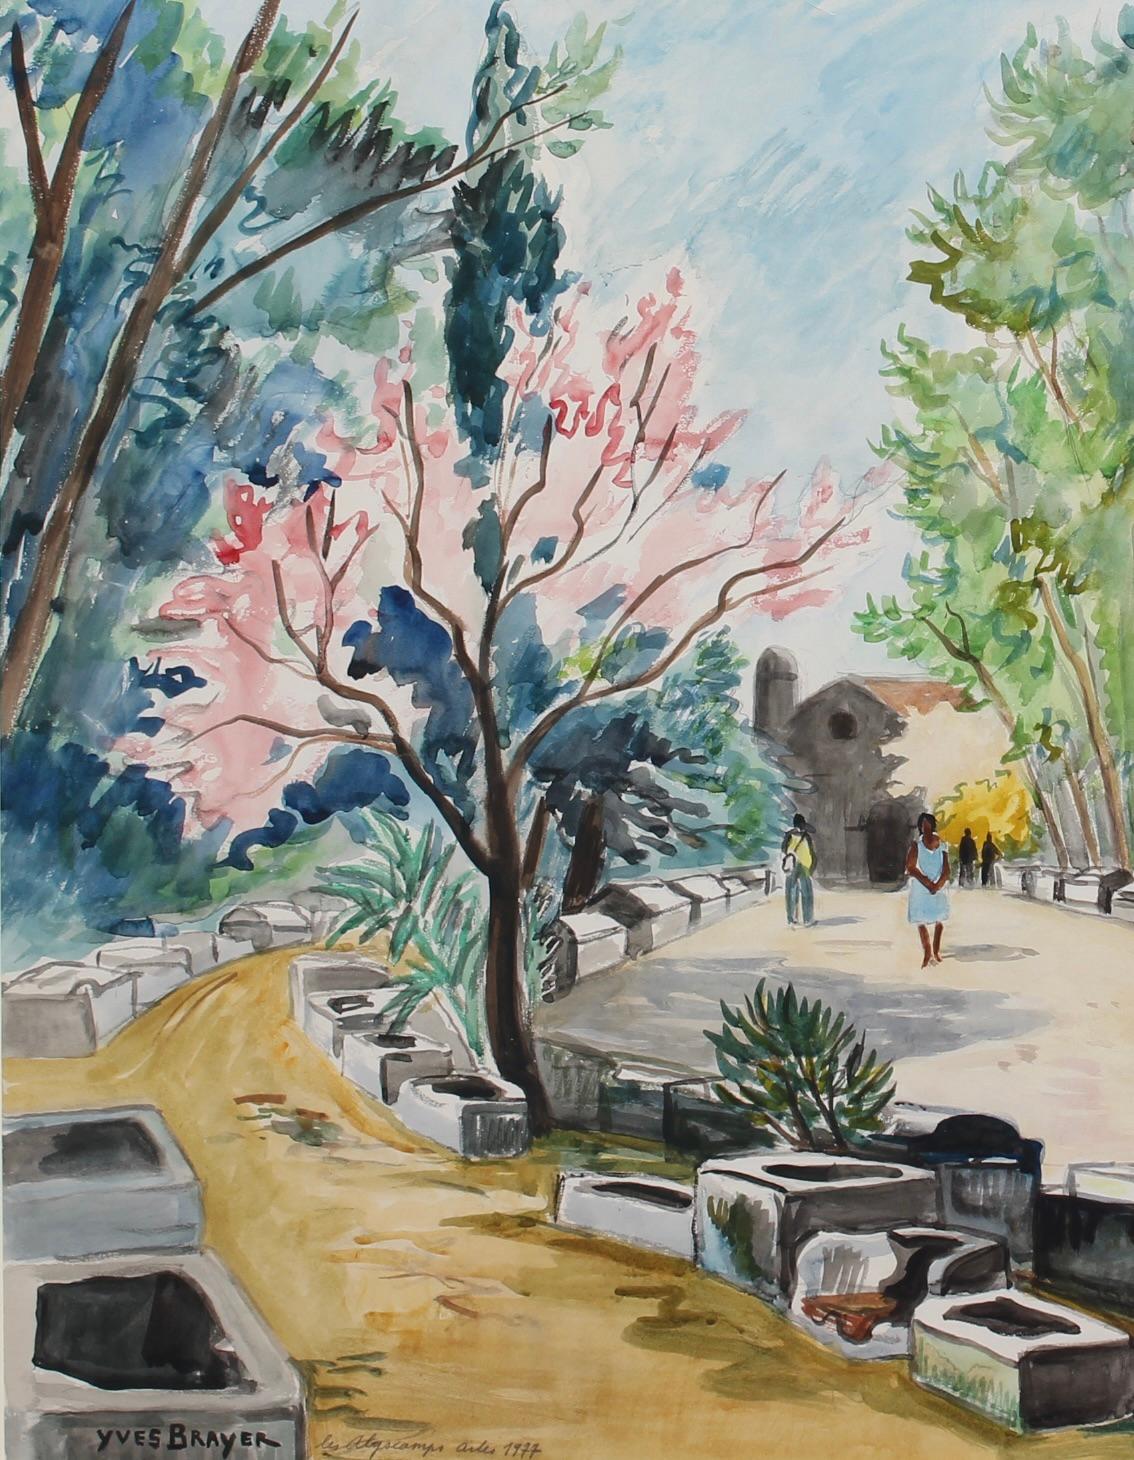 'Les Alyscamps Arles', watercolour on art paper, by Yves Brayer (1977). This term has its origins and is related to the Elysian Fields, also called Elysium, which is the final resting place of the souls of the heroic and the virtuous in Greek